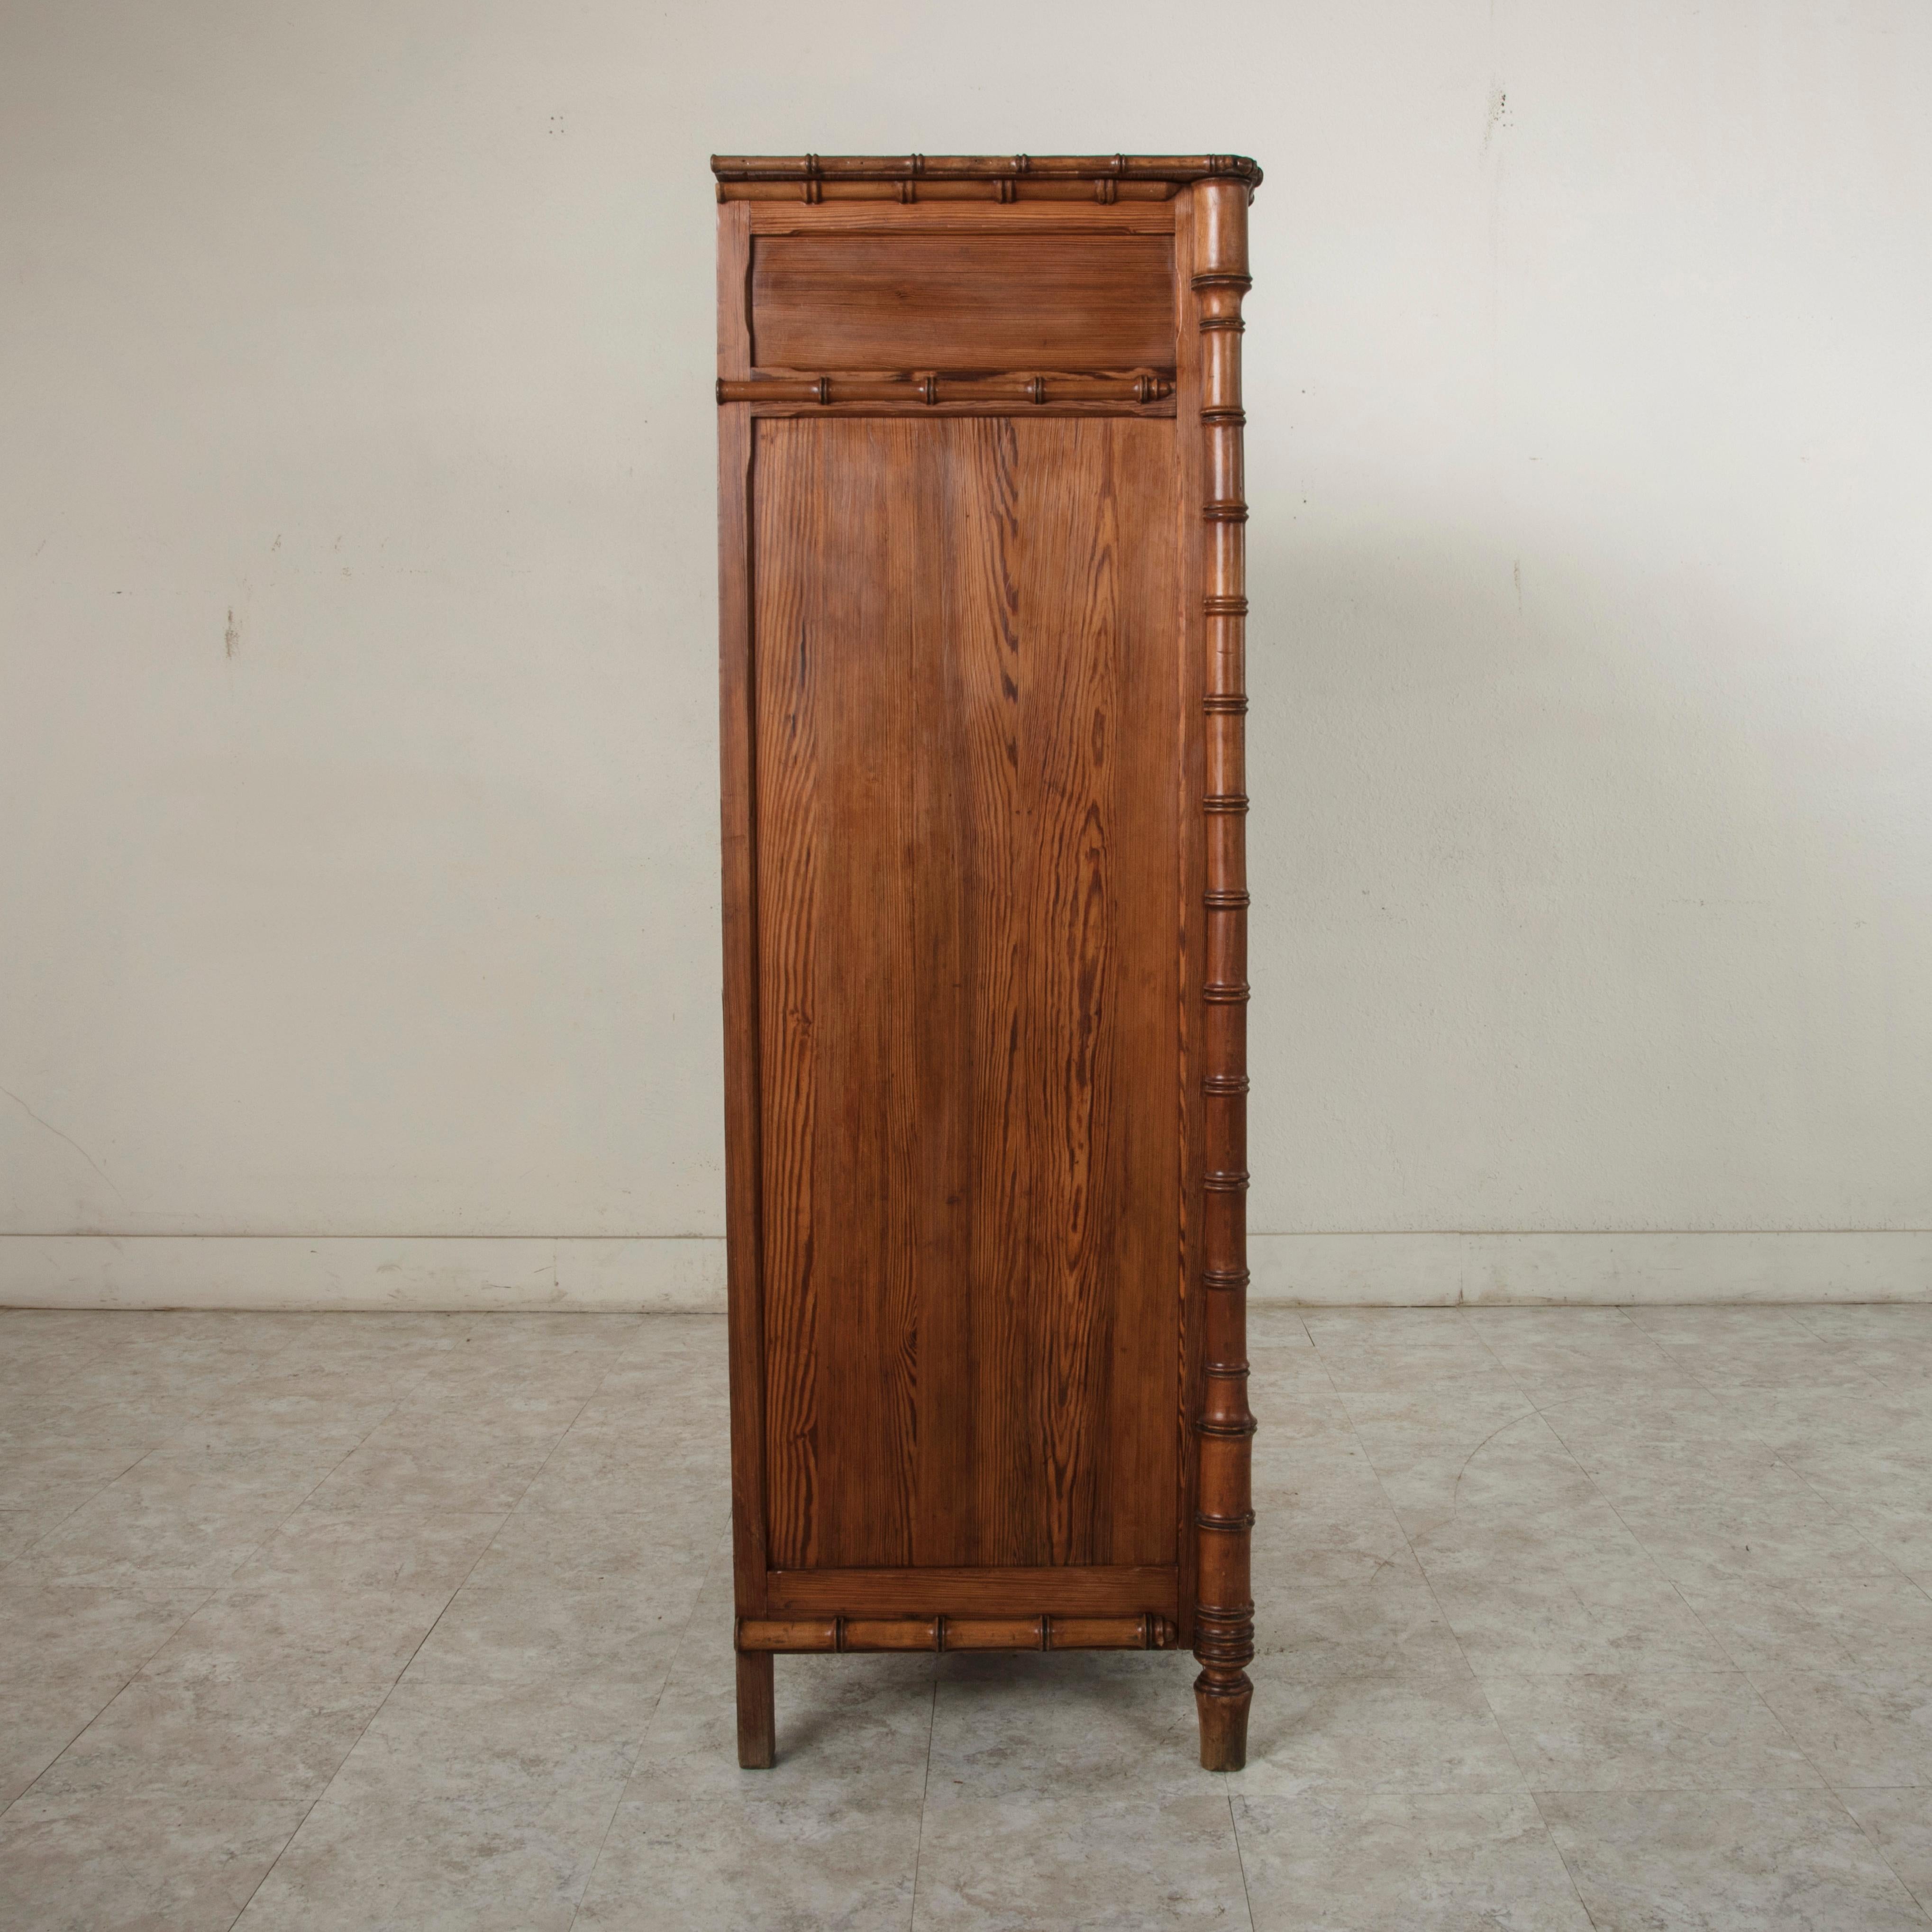 Maple French Colonial Style Faux Bamboo Pitch Pine Armoire Cabinet, circa 1900